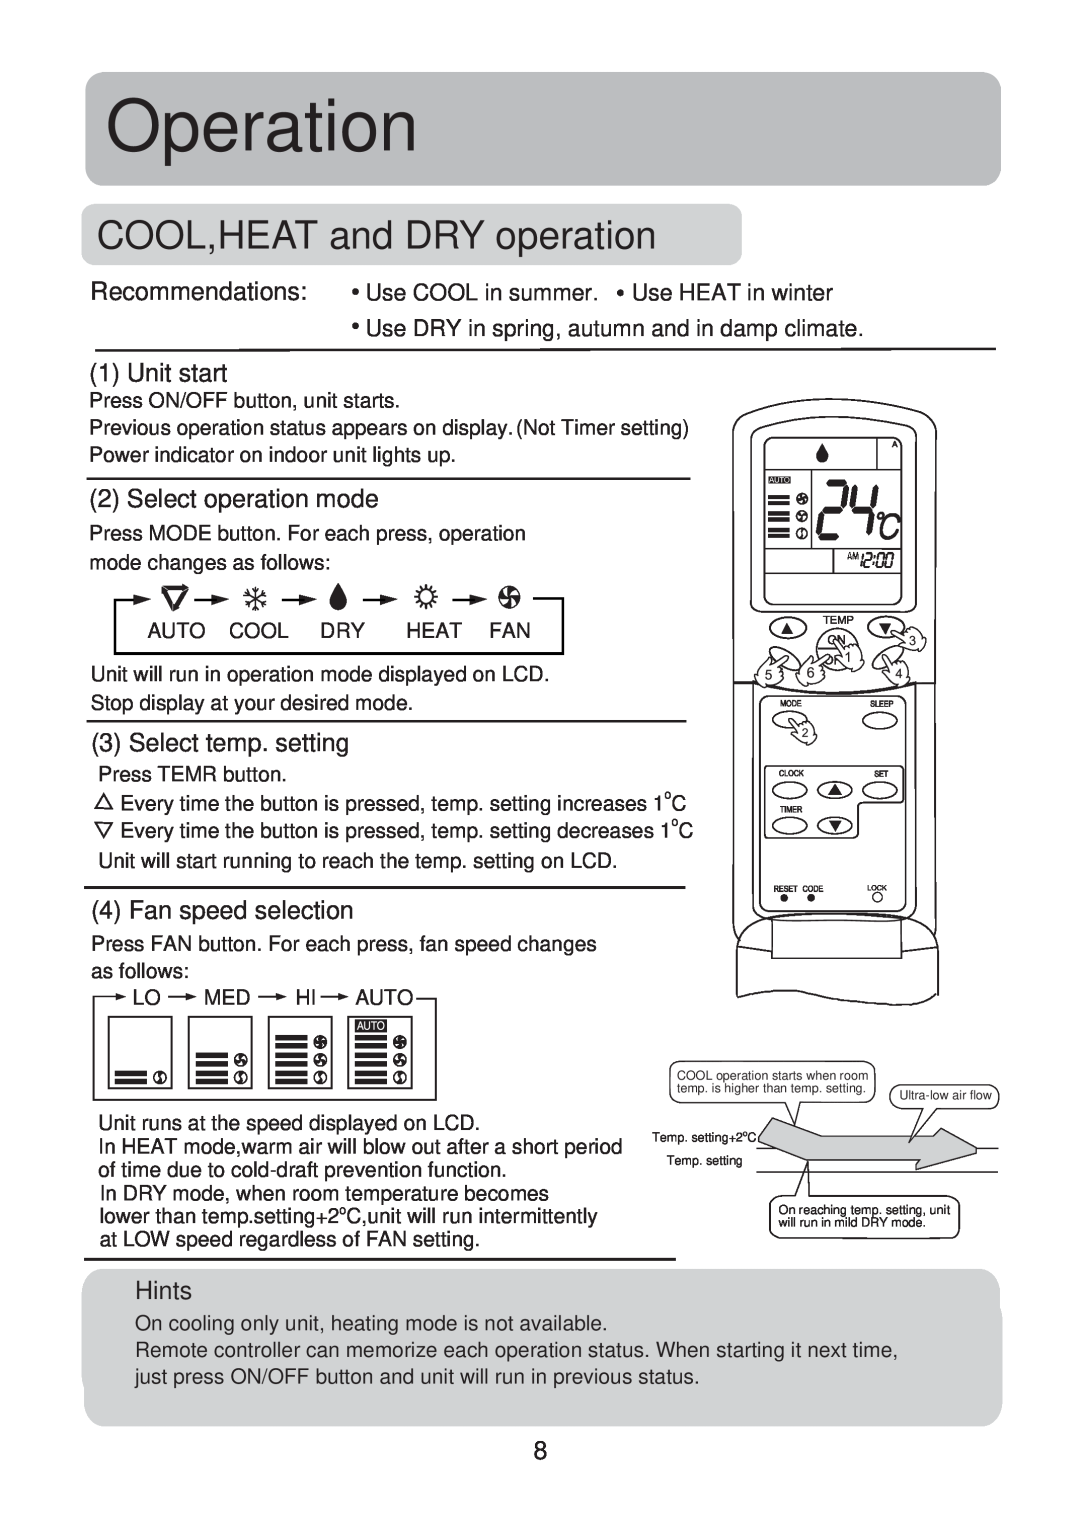 Haier HSU-09CG13 COOL,HEAT and DRY operation, Operation, Unit start, Select operation mode, Select temp. setting, Hints 